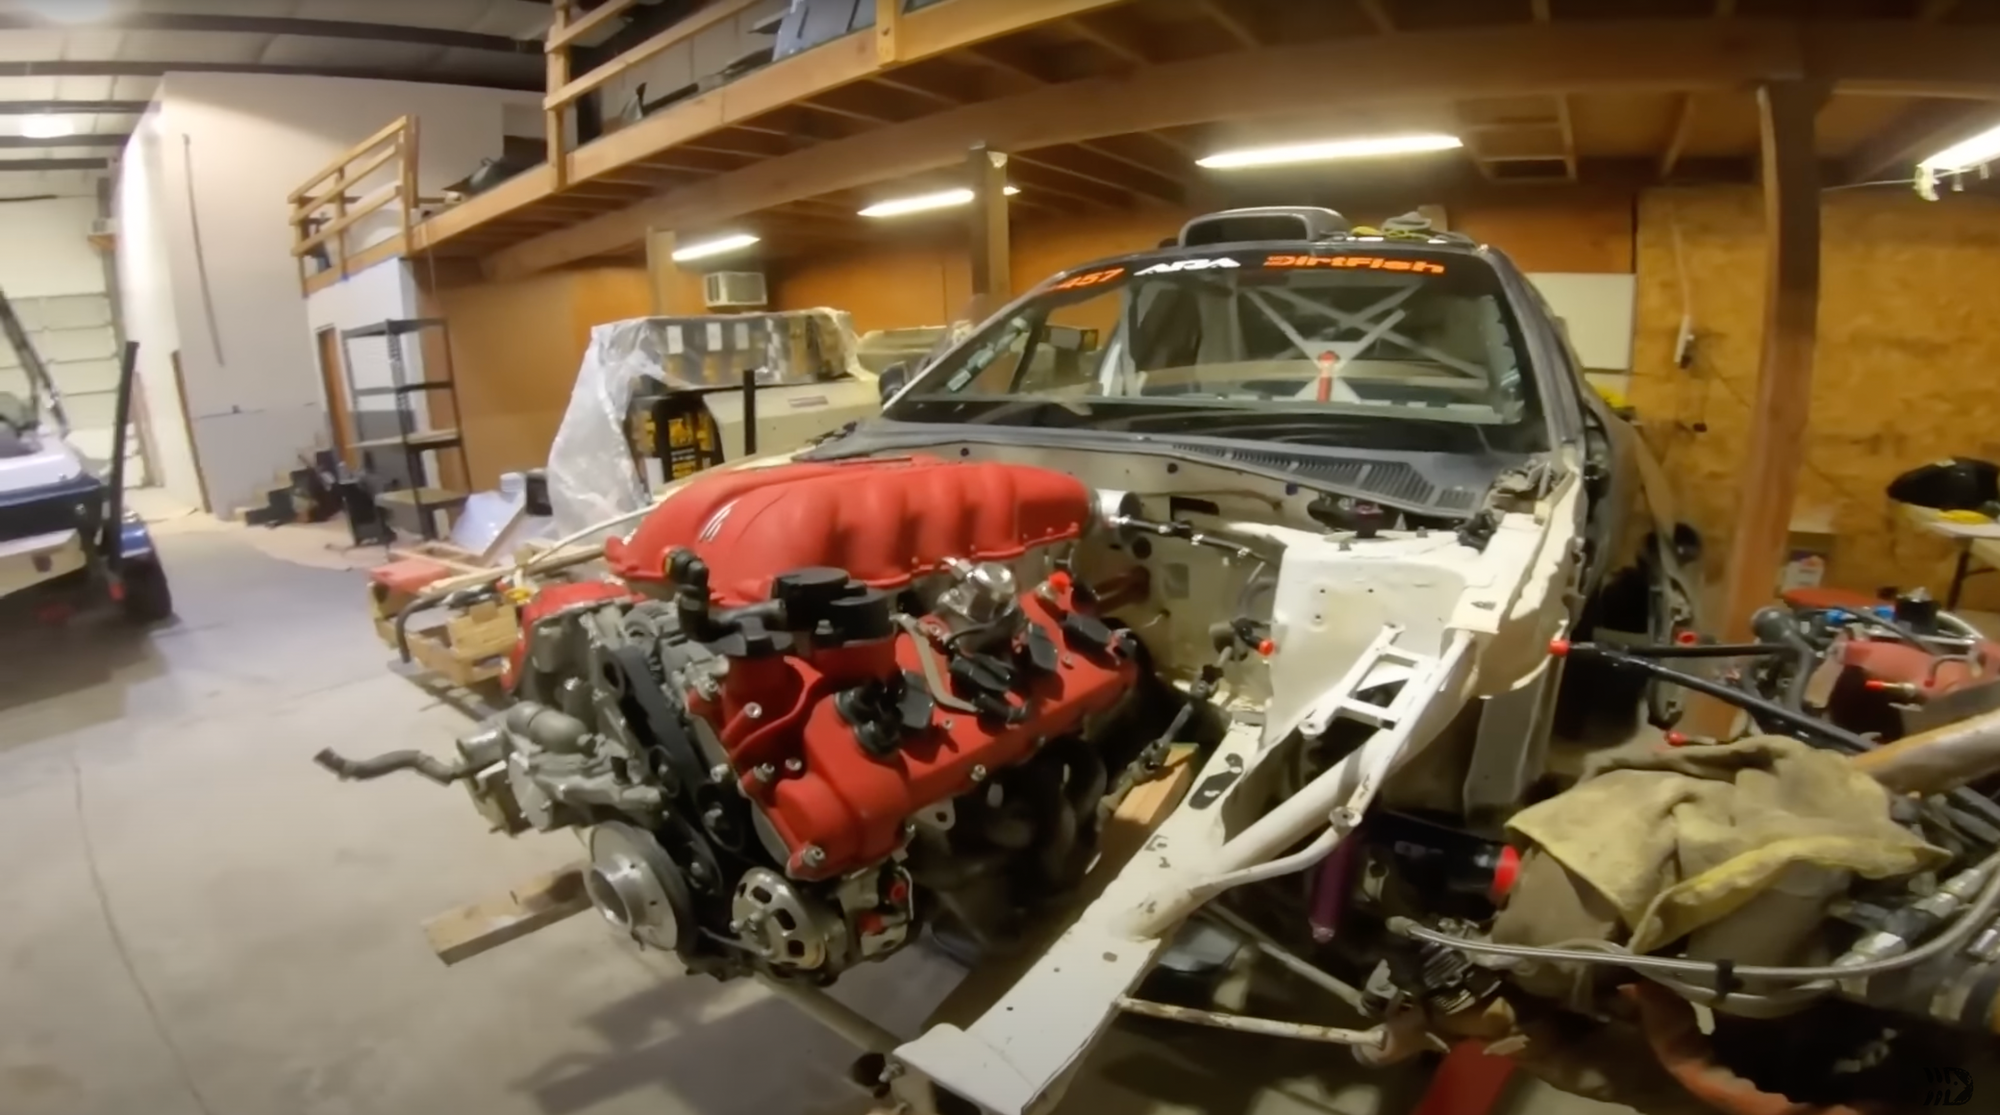 Exchanging your Ferrari V8 for your Subaru Rally Car is one way to repair the head gaskets